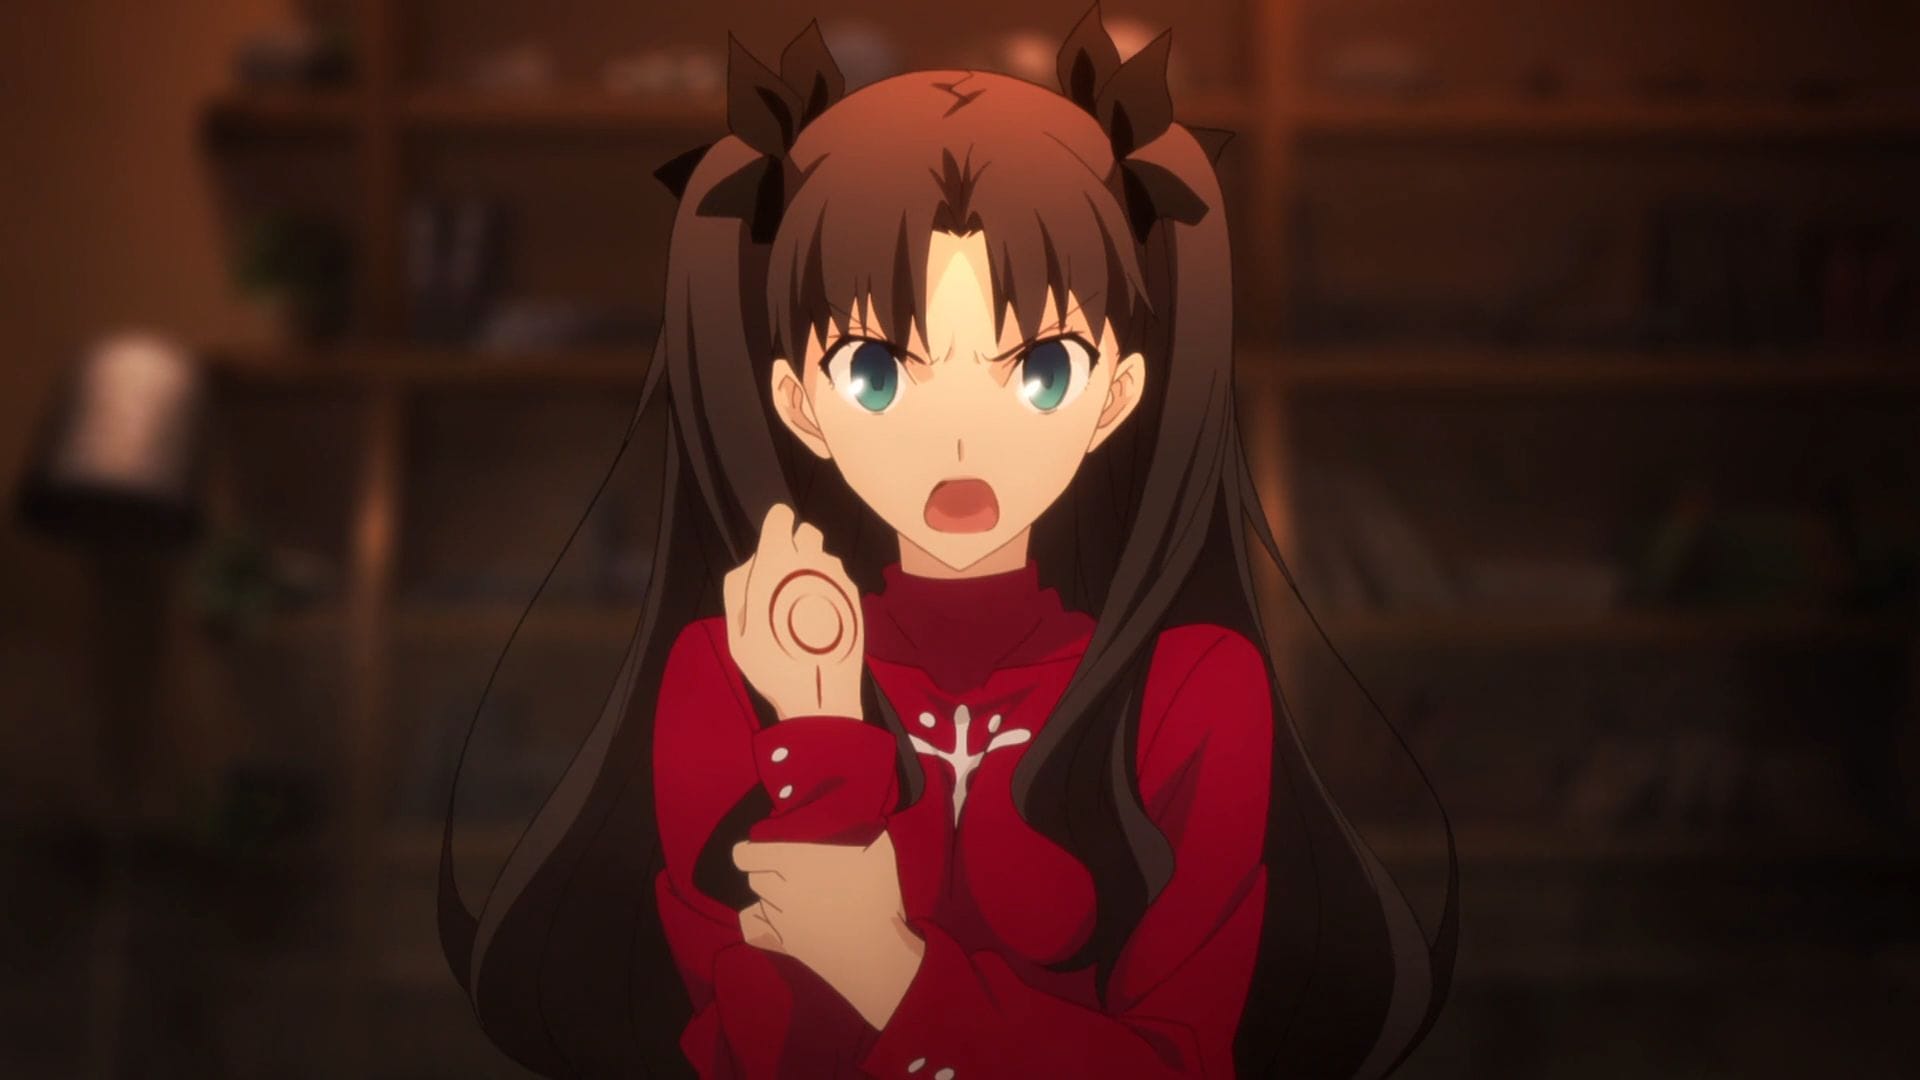 Fate/Stay Night: Unlimited Blade Works Season 1 – The Good, The